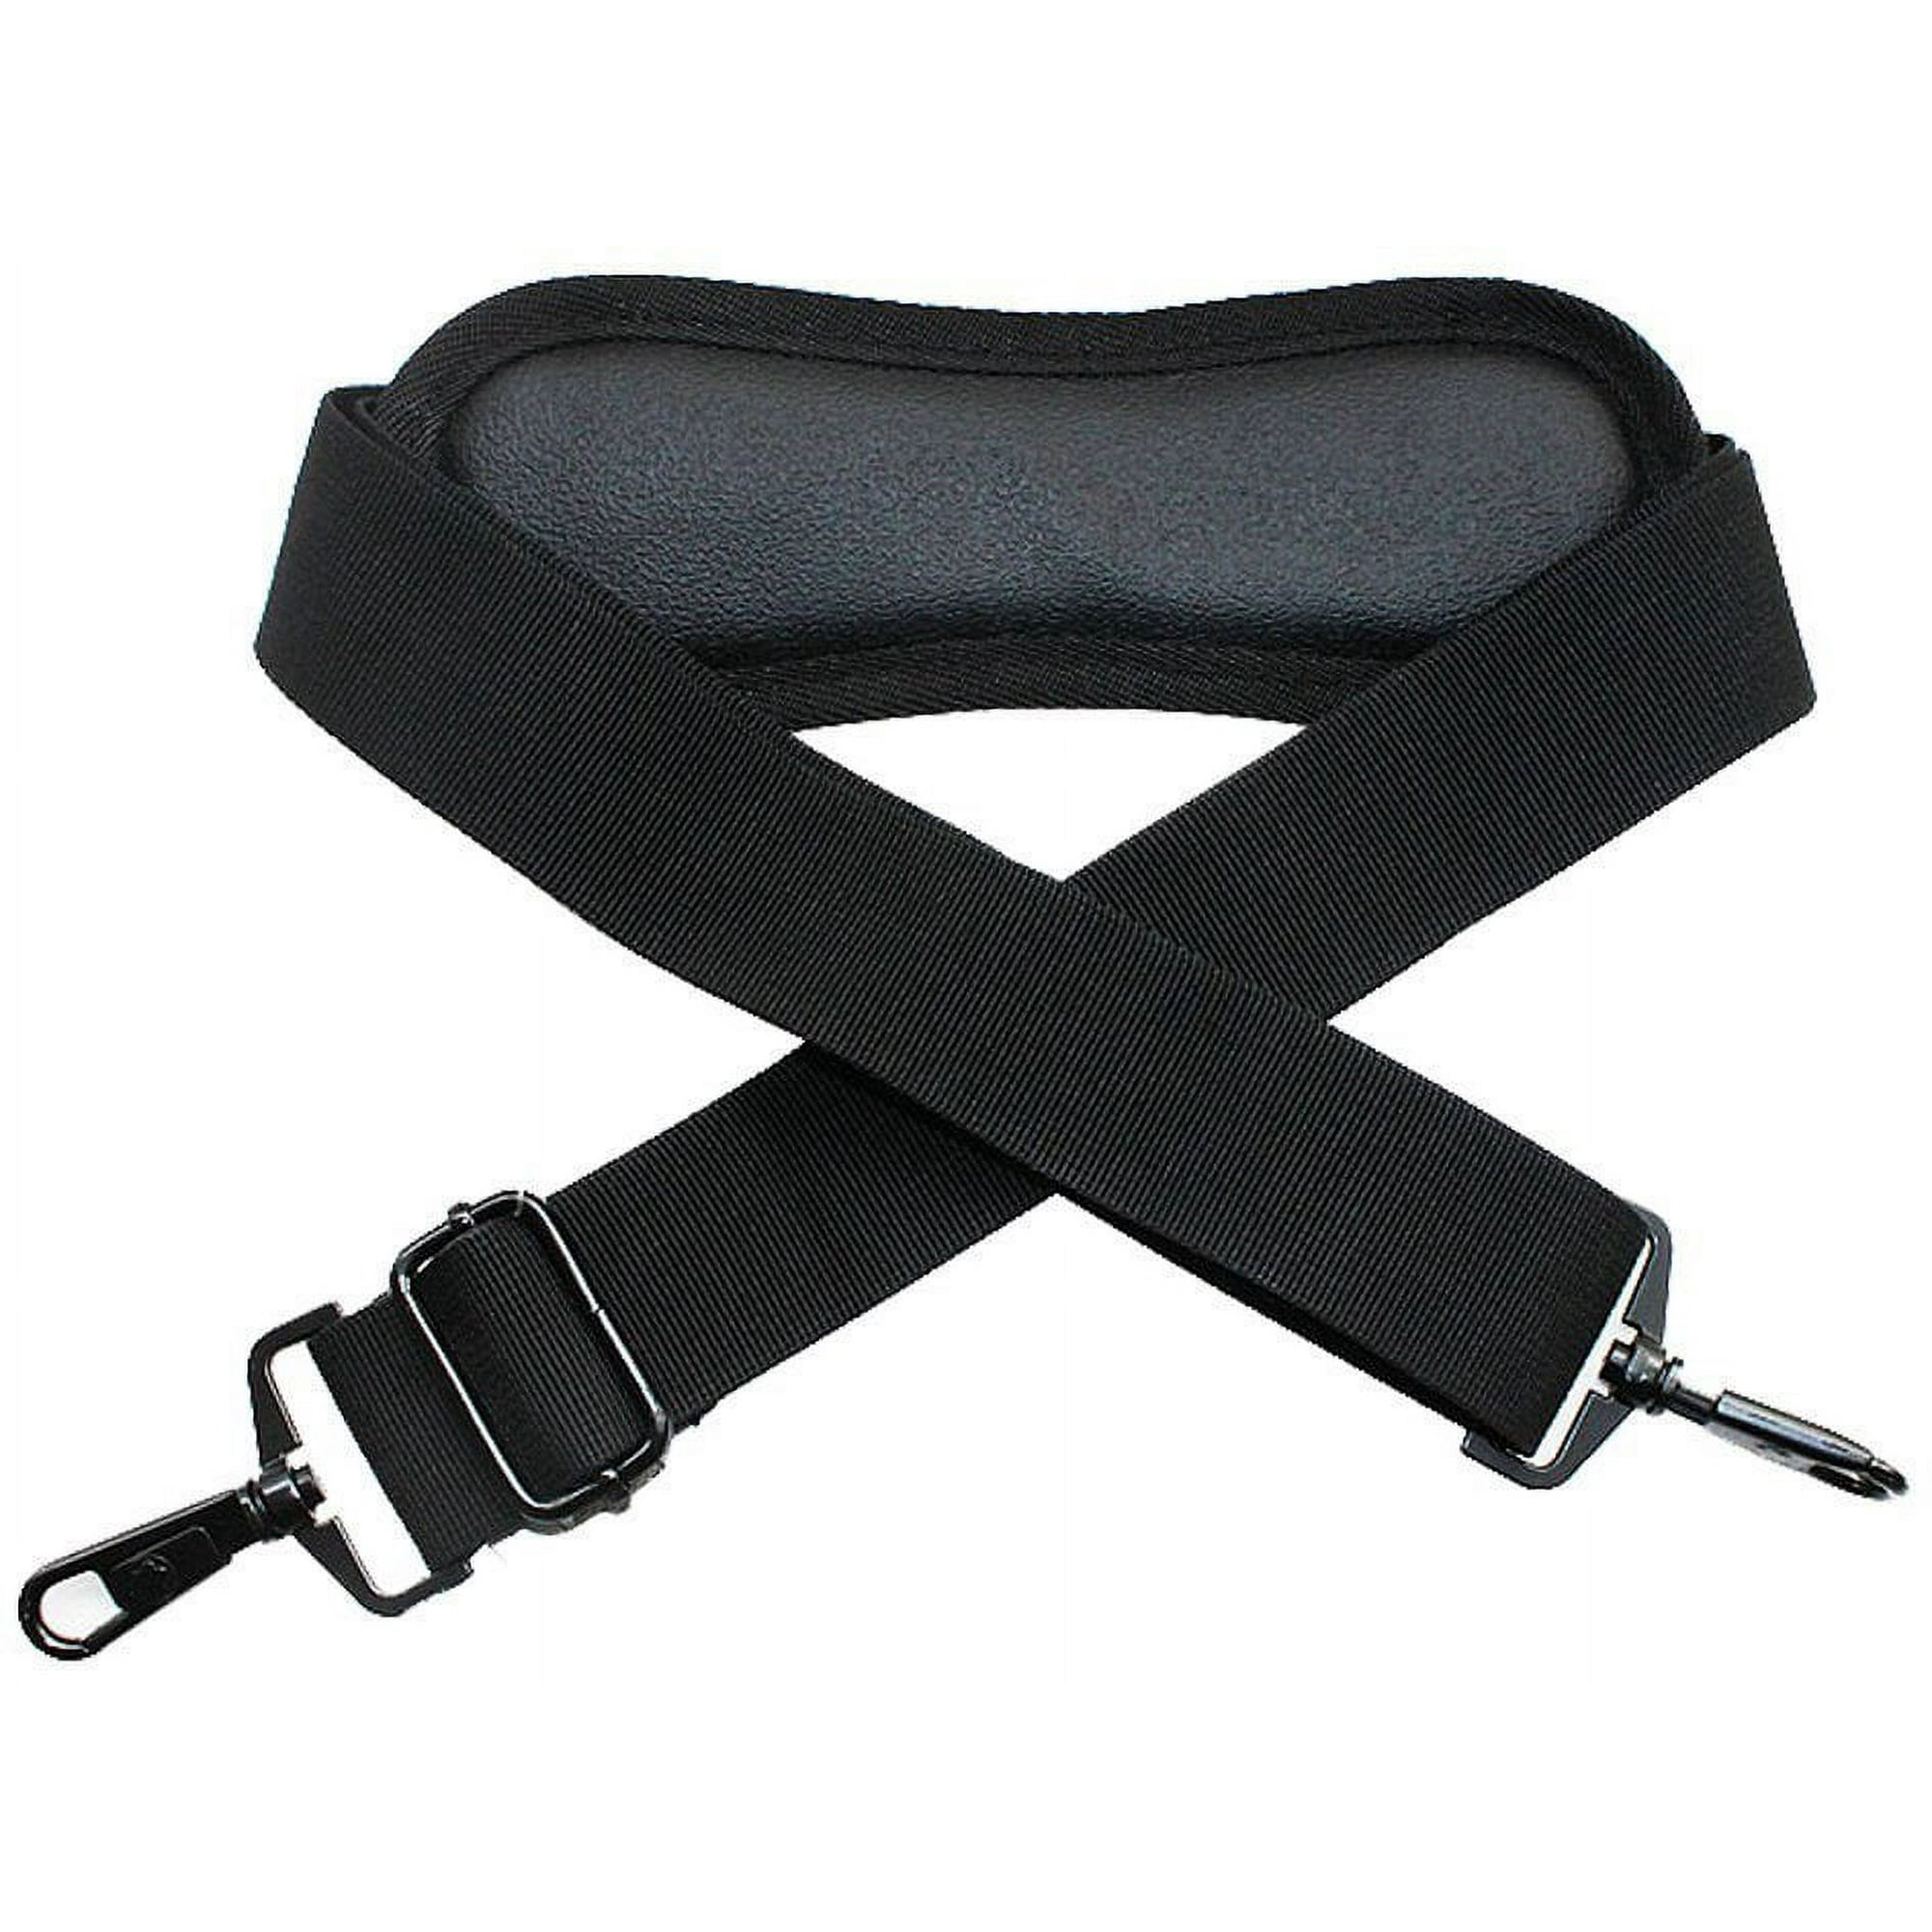 Adjustable Padded Replacement Shoulder Strap with Metal Swivel Hooks f